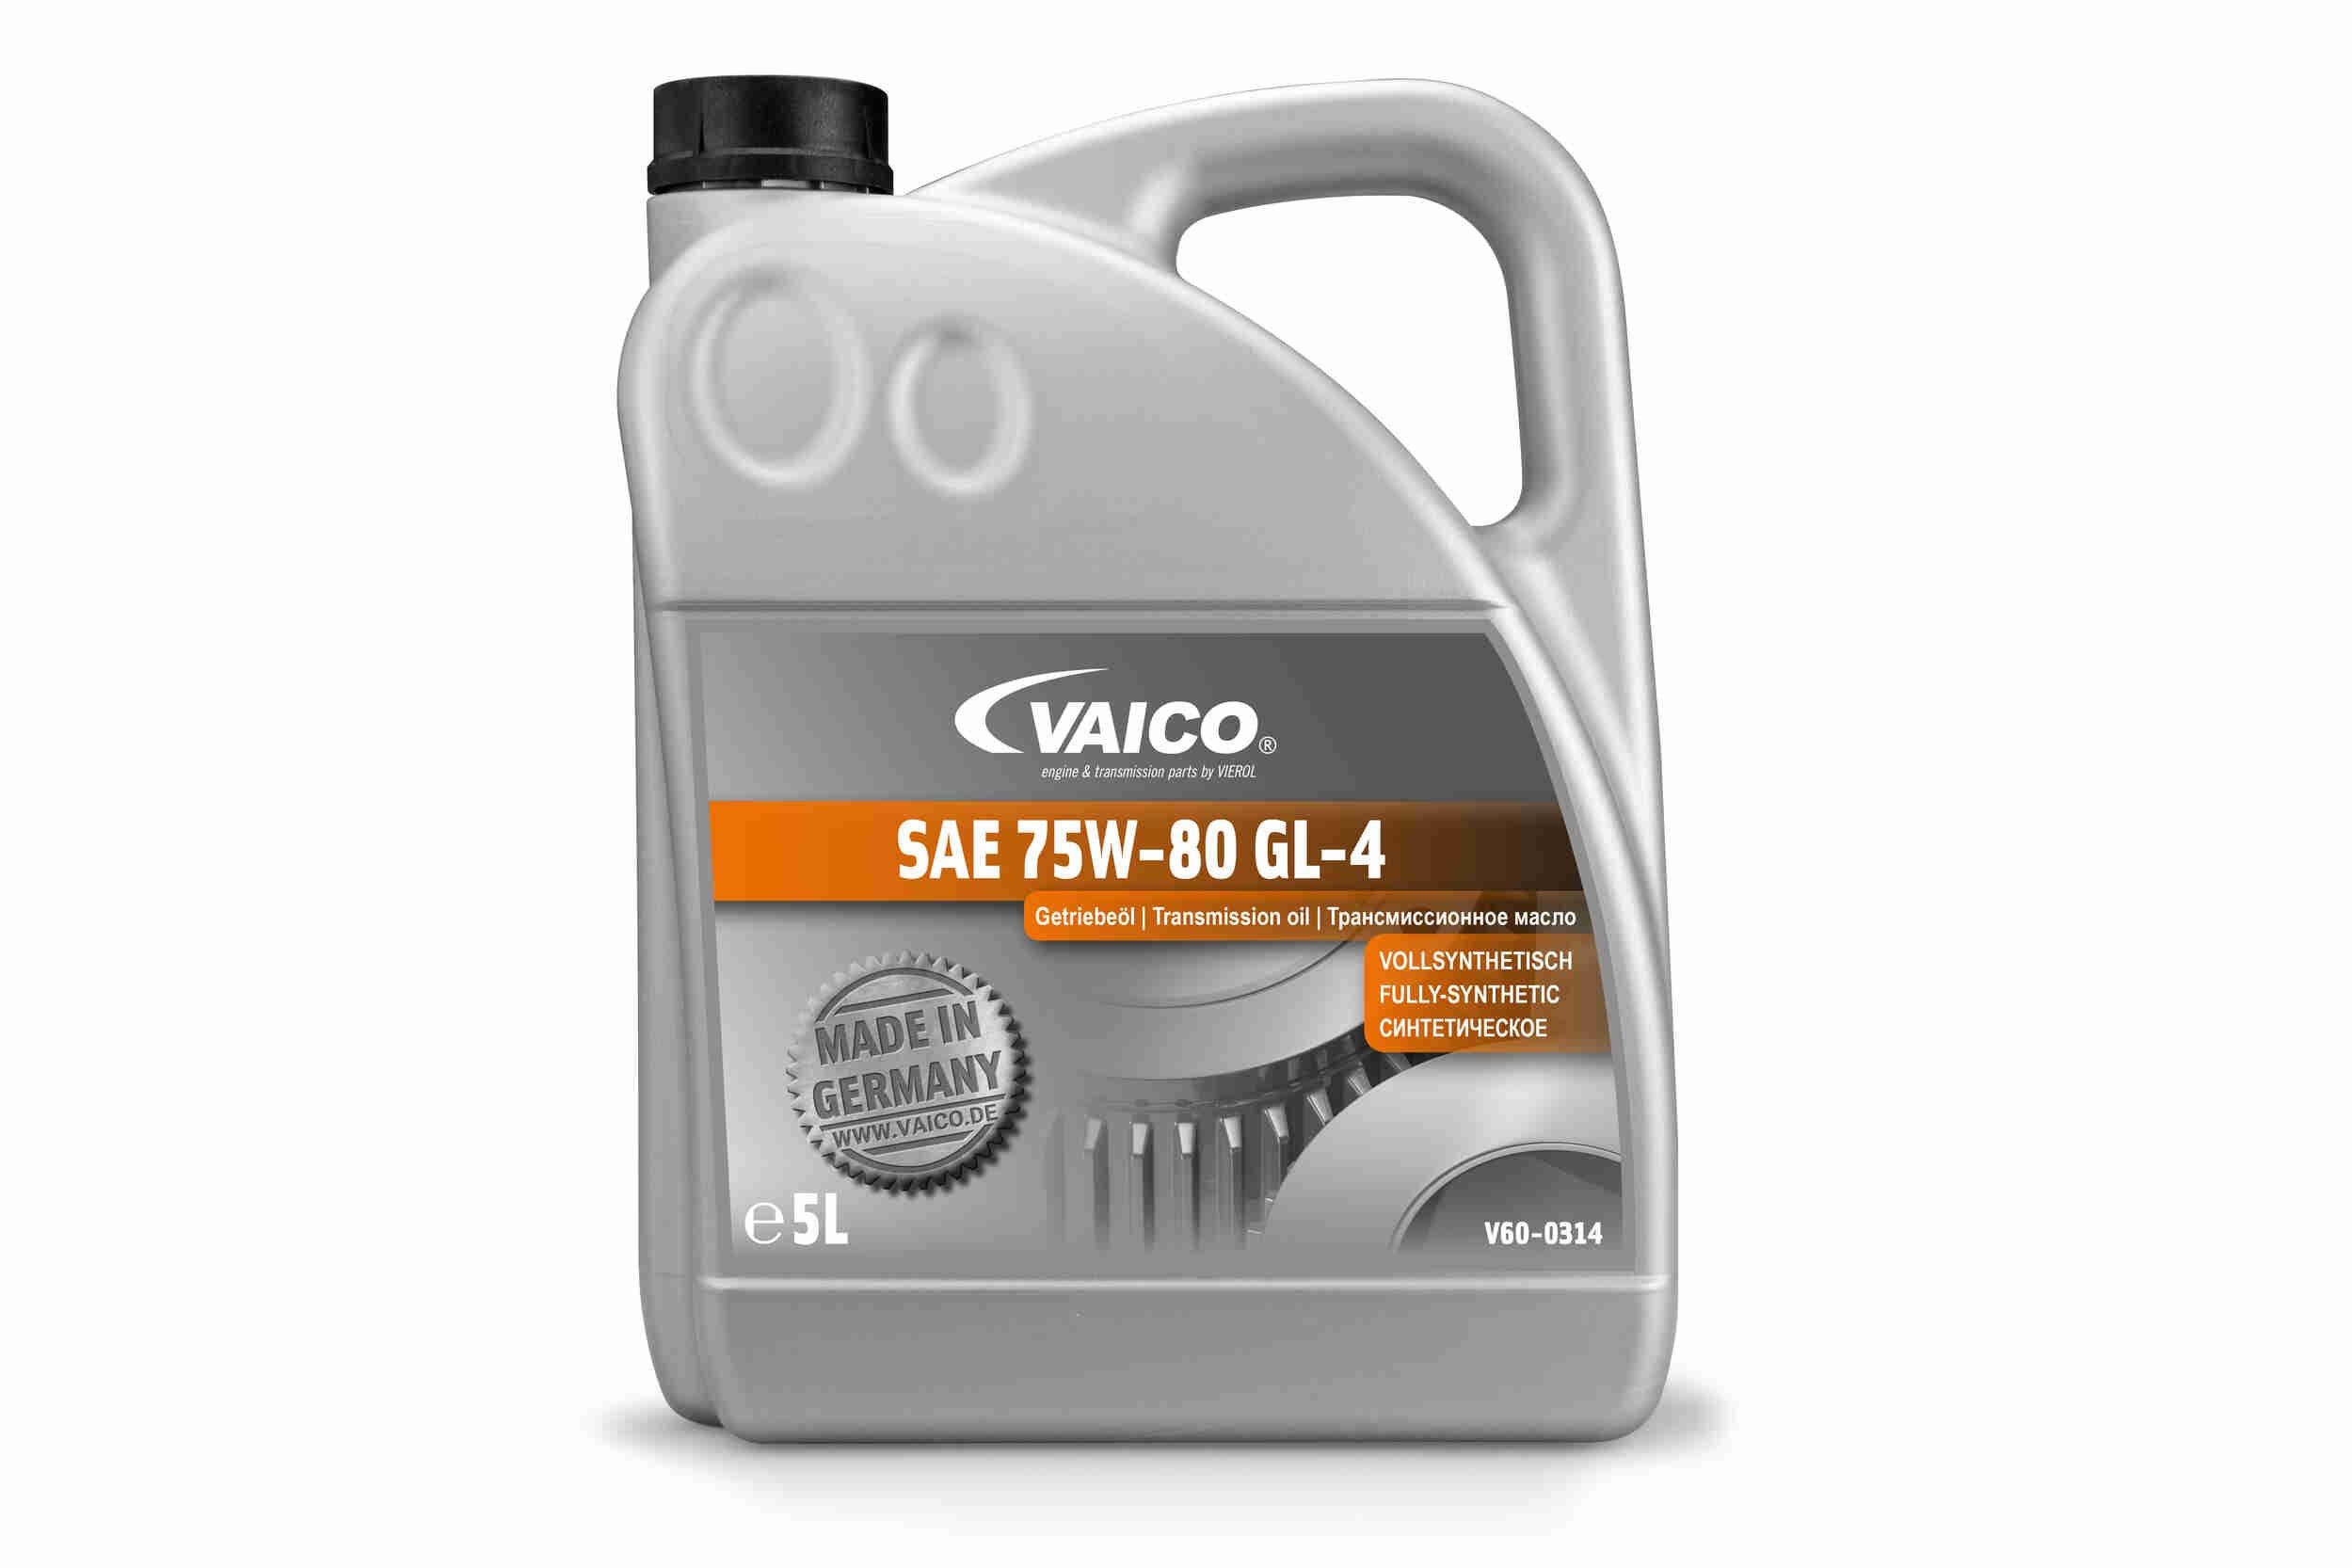 VAICO V60-0314 Manual Transmission Oil Capacity: 5l, 75W-80, Q+, original equipment manufacturer quality MADE IN GERMANY